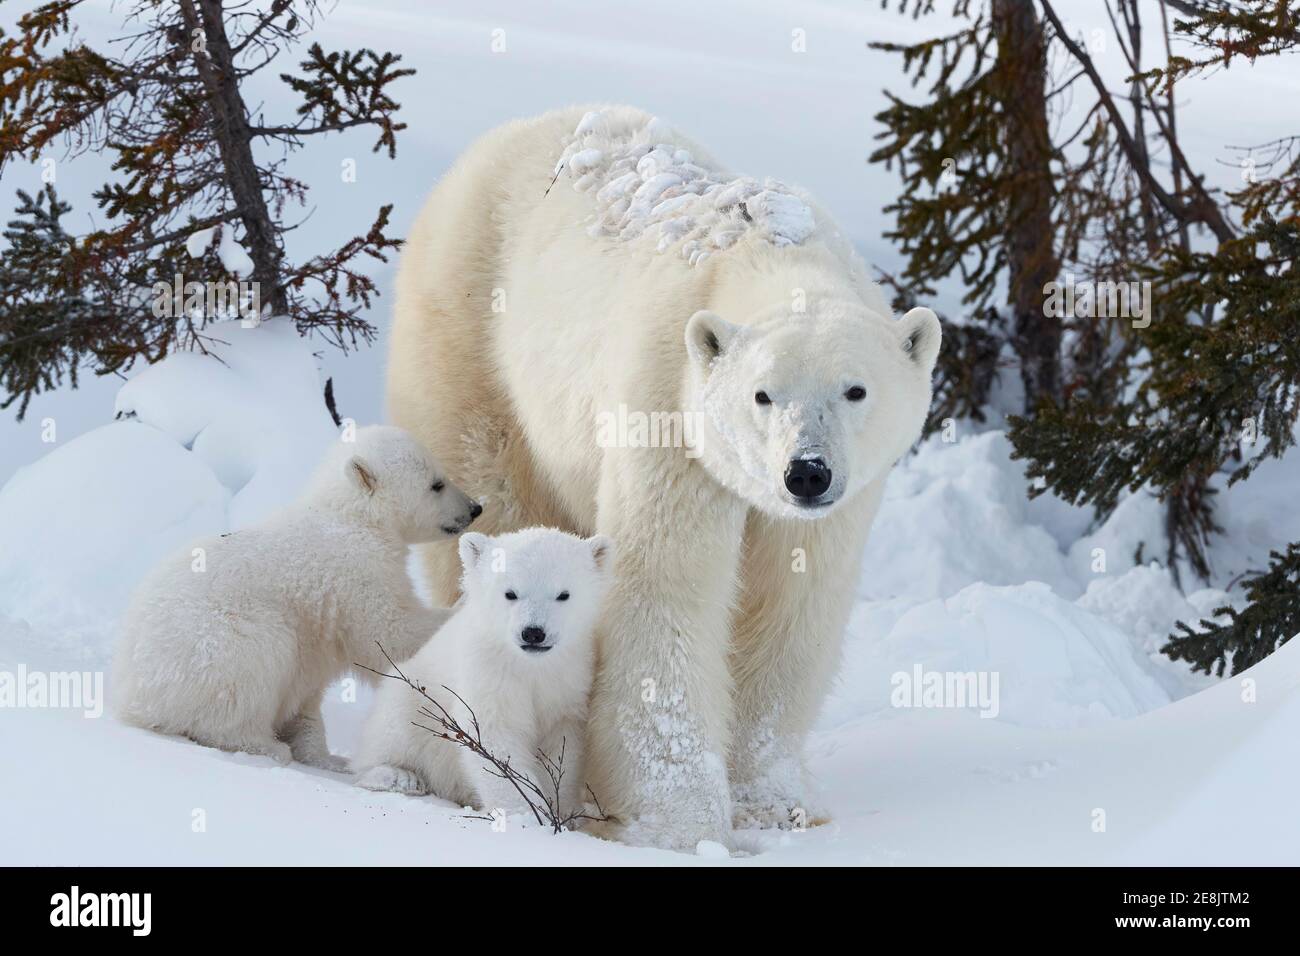 Polar bears (Ursus maritimus), mother with two newborns in the snow in front of a group of trees, Wapusk National Park, Manitoba, Canada Stock Photo